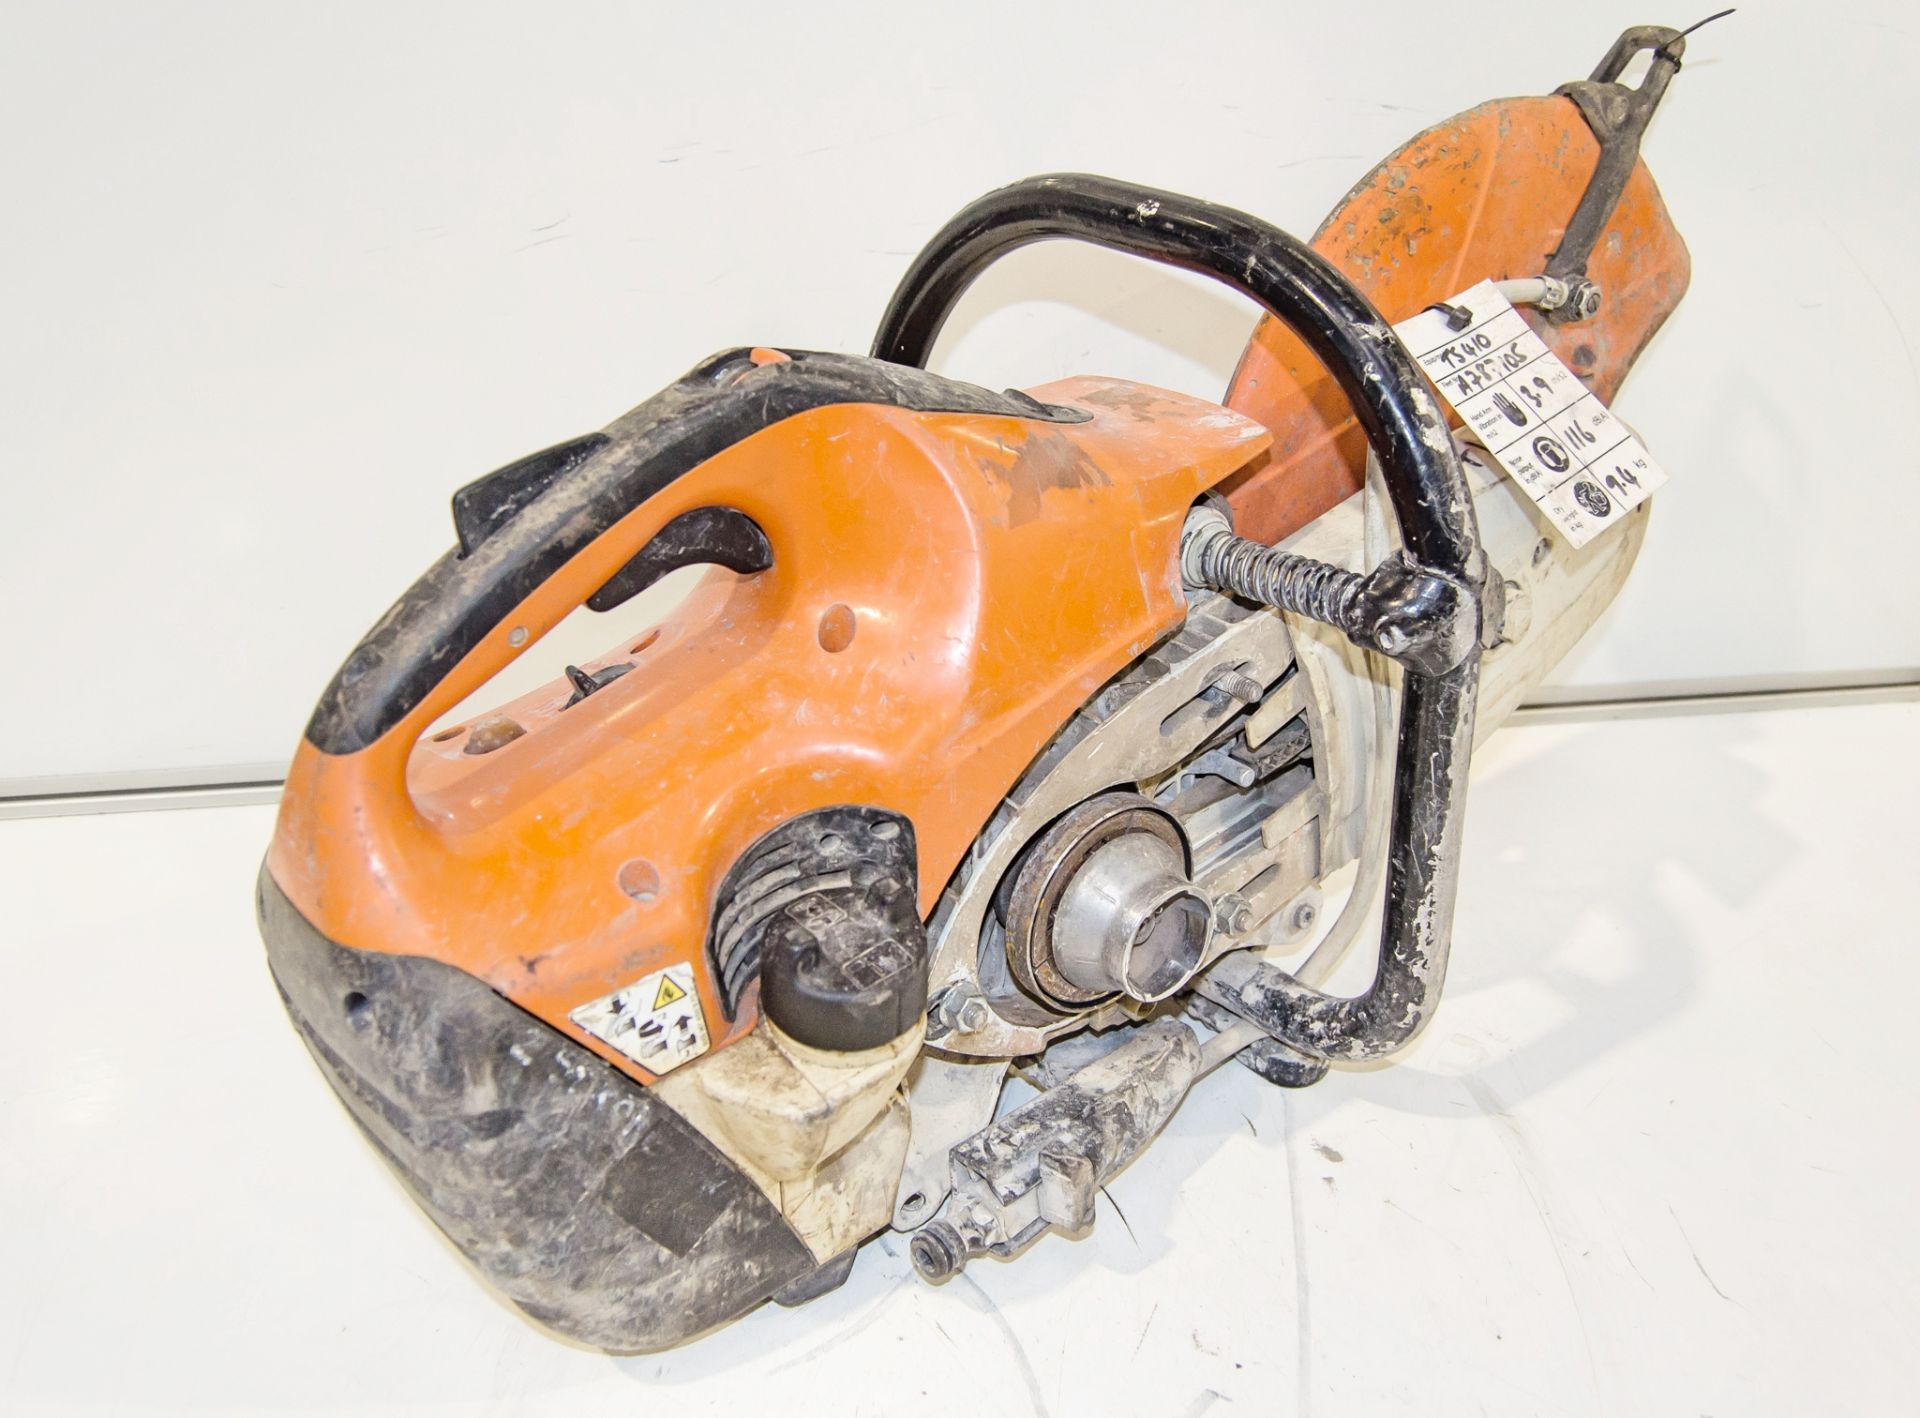 Stihl TS410 petrol driven cut off saw ** Pull cord assembly missing ** A787105 - Image 2 of 2